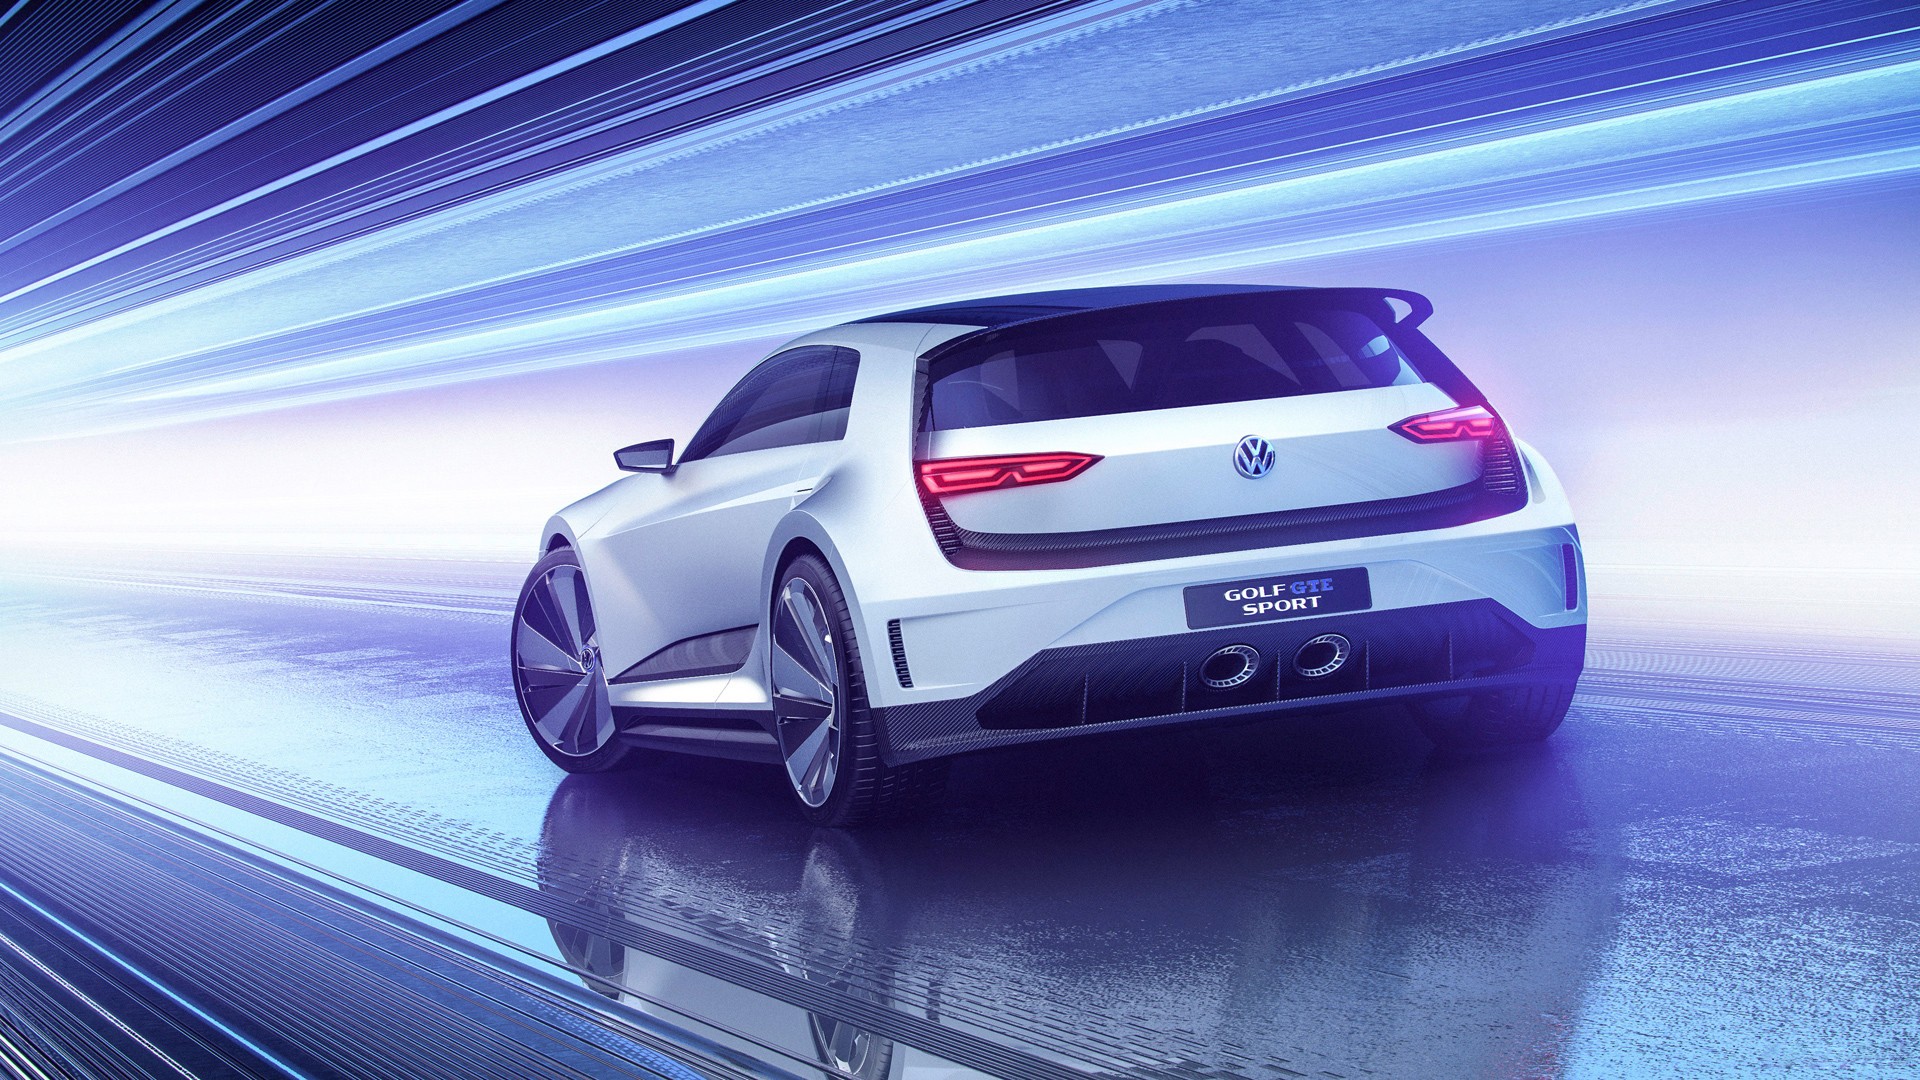 General 1920x1080 Volkswagen Golf GTE car Volkswagen vehicle silver cars reflection concept cars